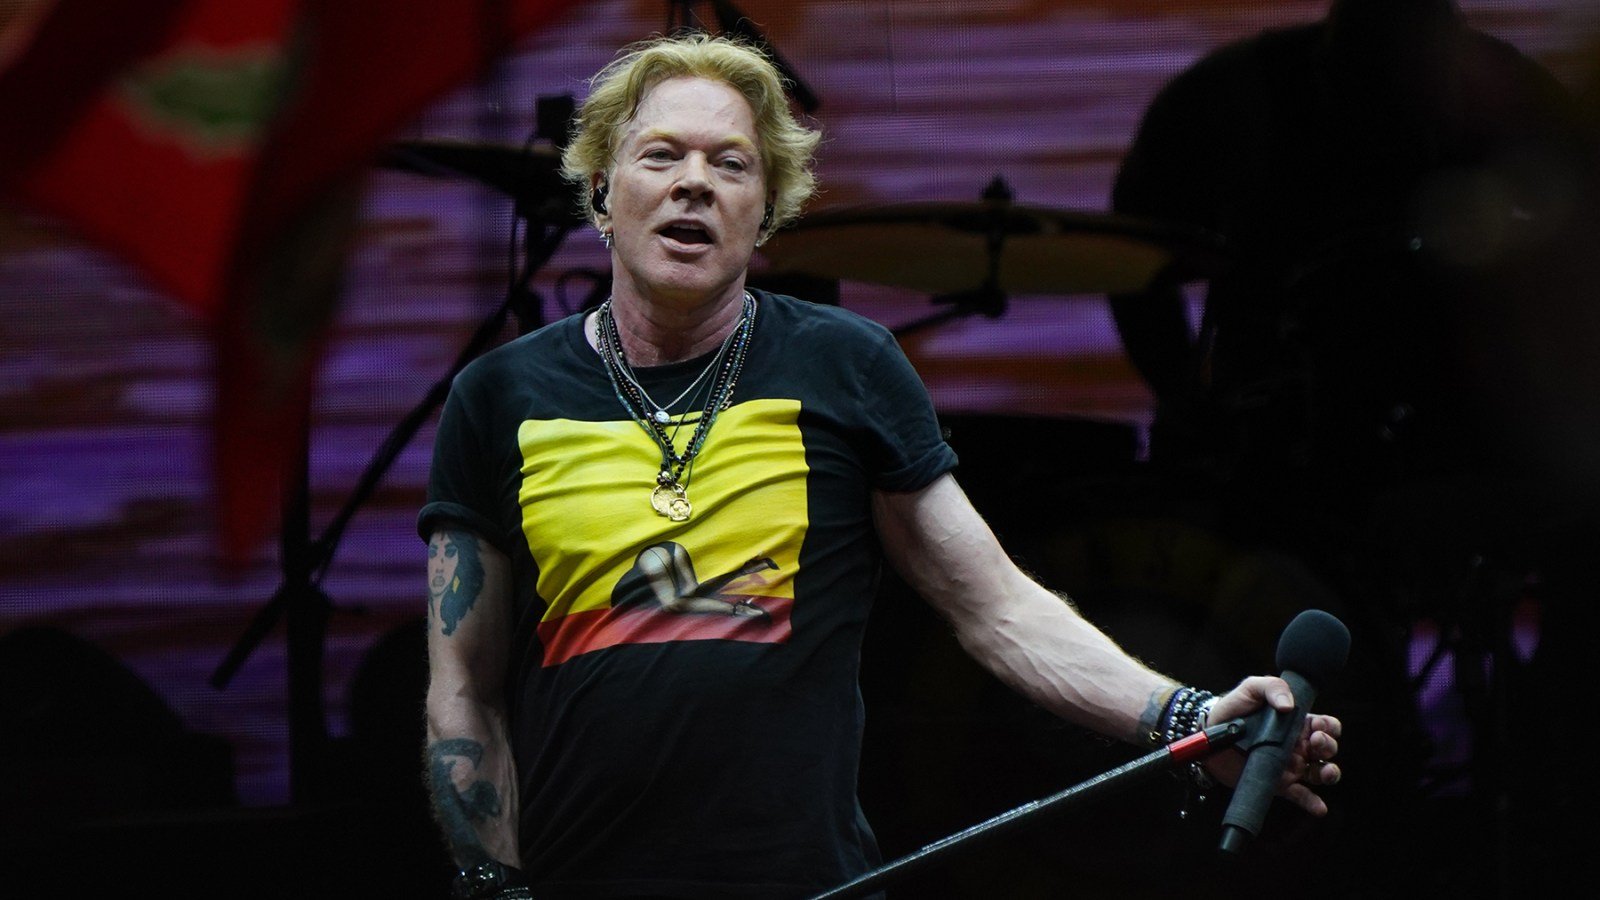 Woman Details Decades-Old Sexual Assault Allegations Against Axl Rose